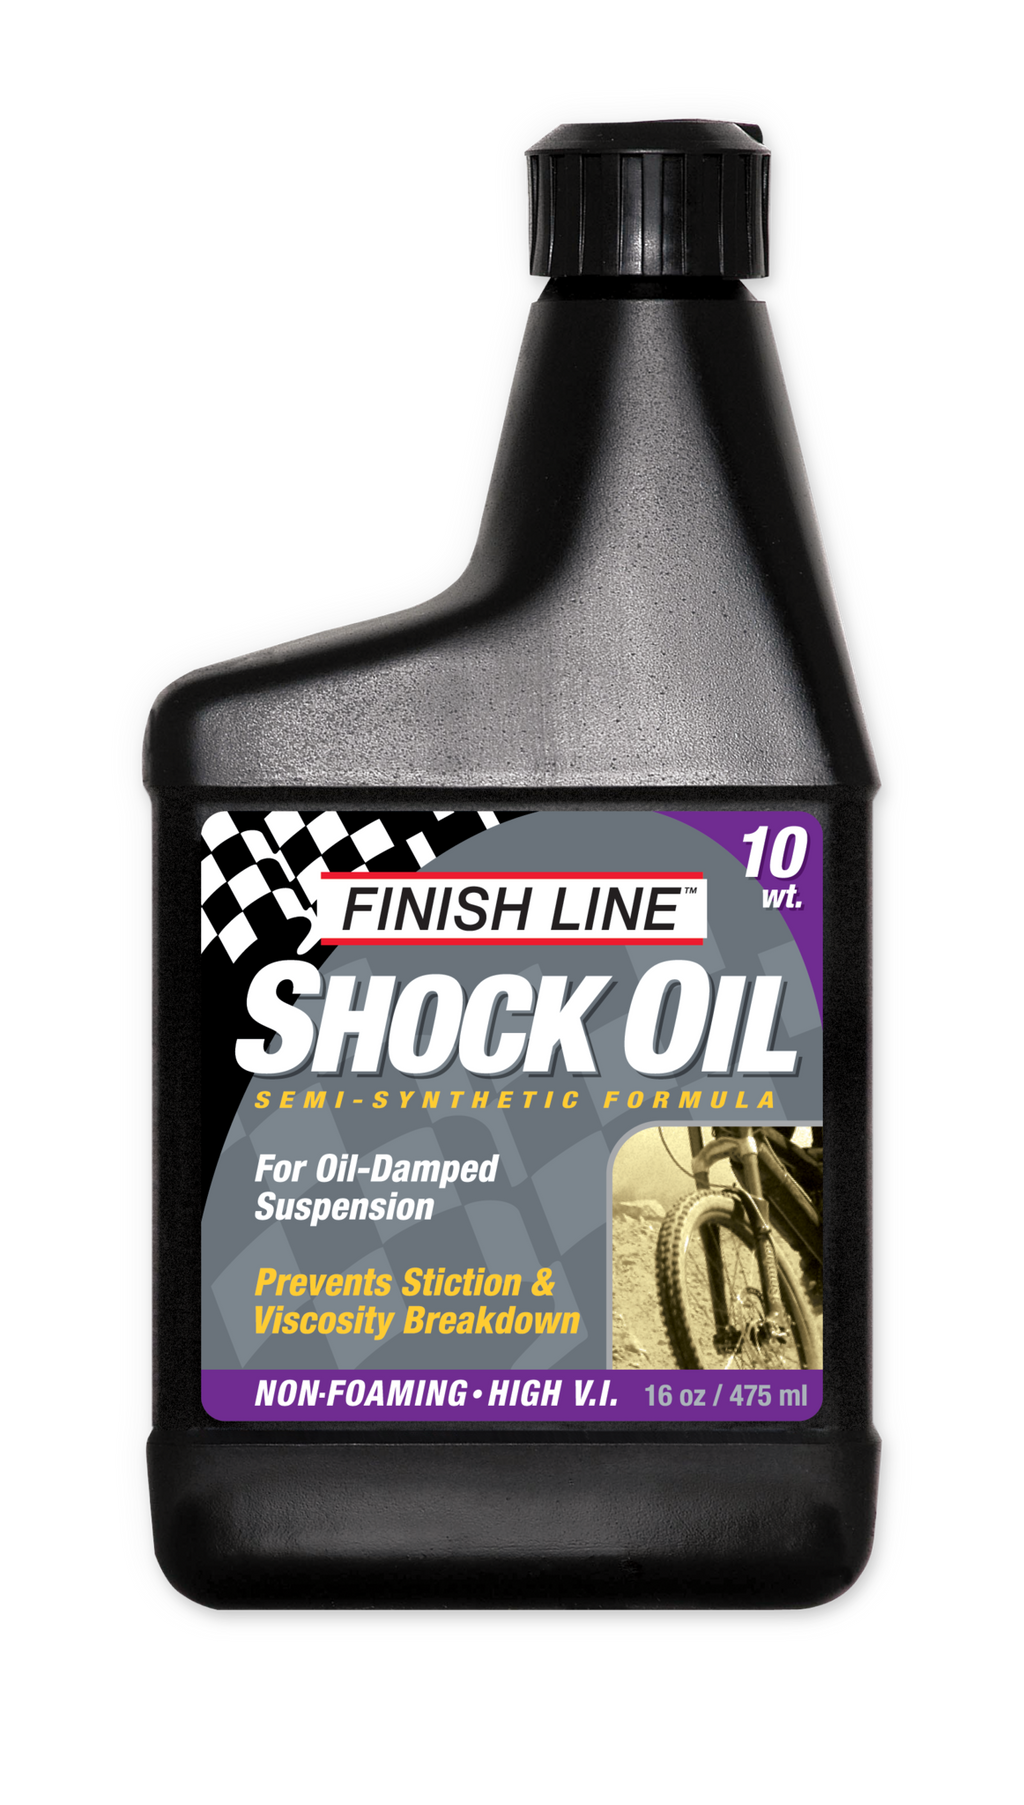 Finish Line Shock Oil 10 Weight (10wt), 16oz